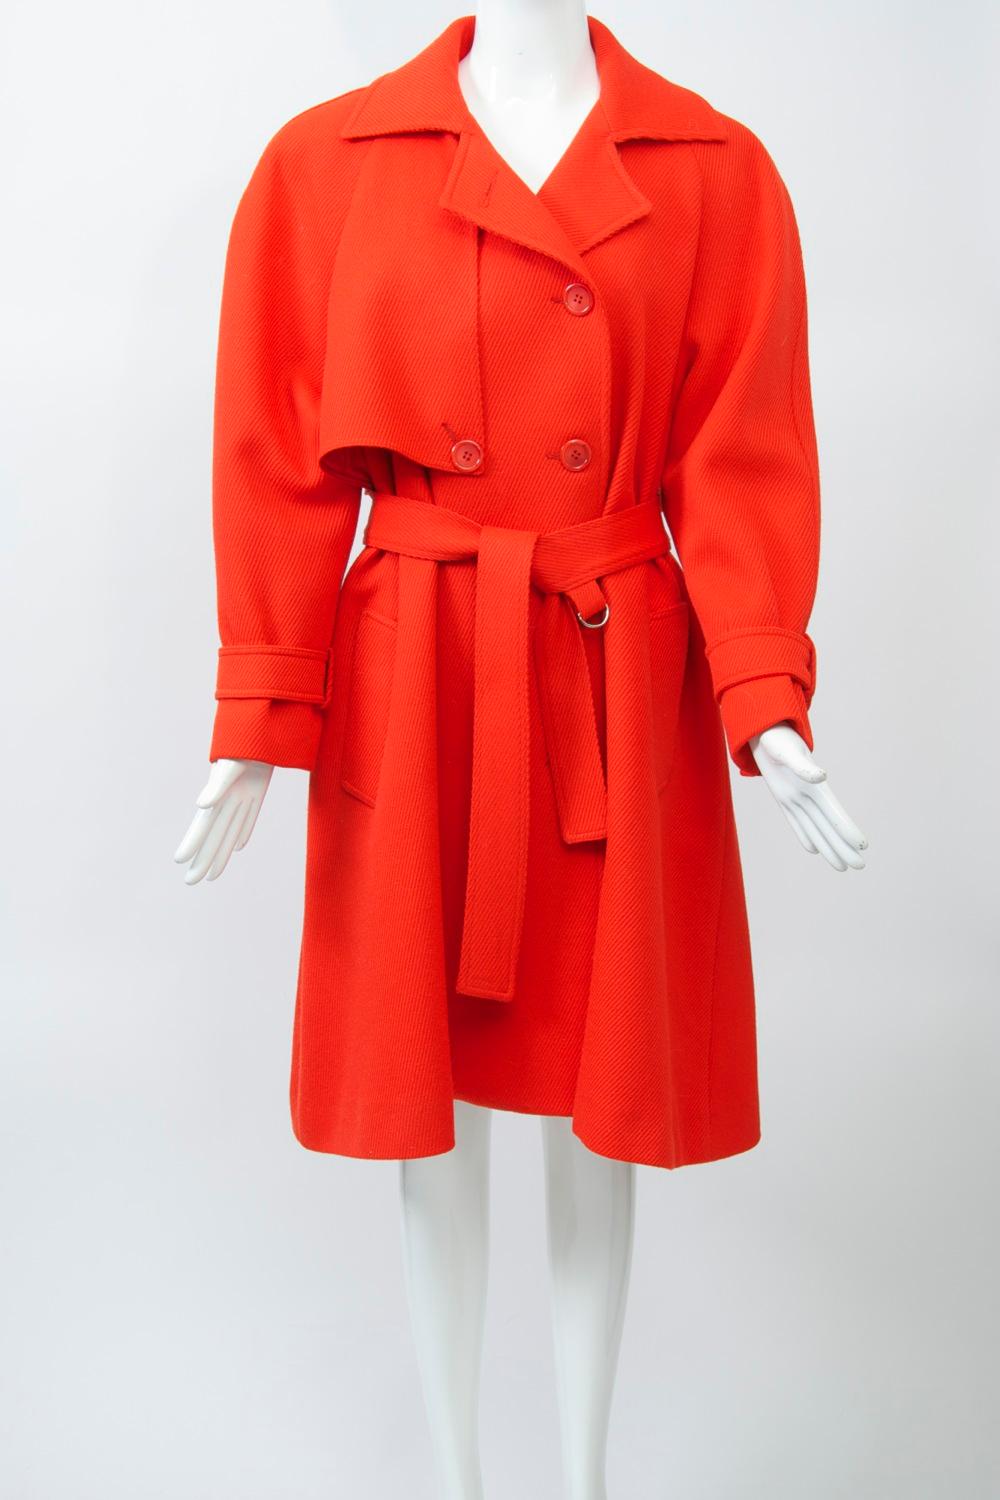 Ilie Wacs was a gifted New York designer of coats and suits, both under his eponymous label and for the highly regarded manufacturer Originala. This example of his later work, from the 1980s, is his adaptation of the trench coat in bright red wool